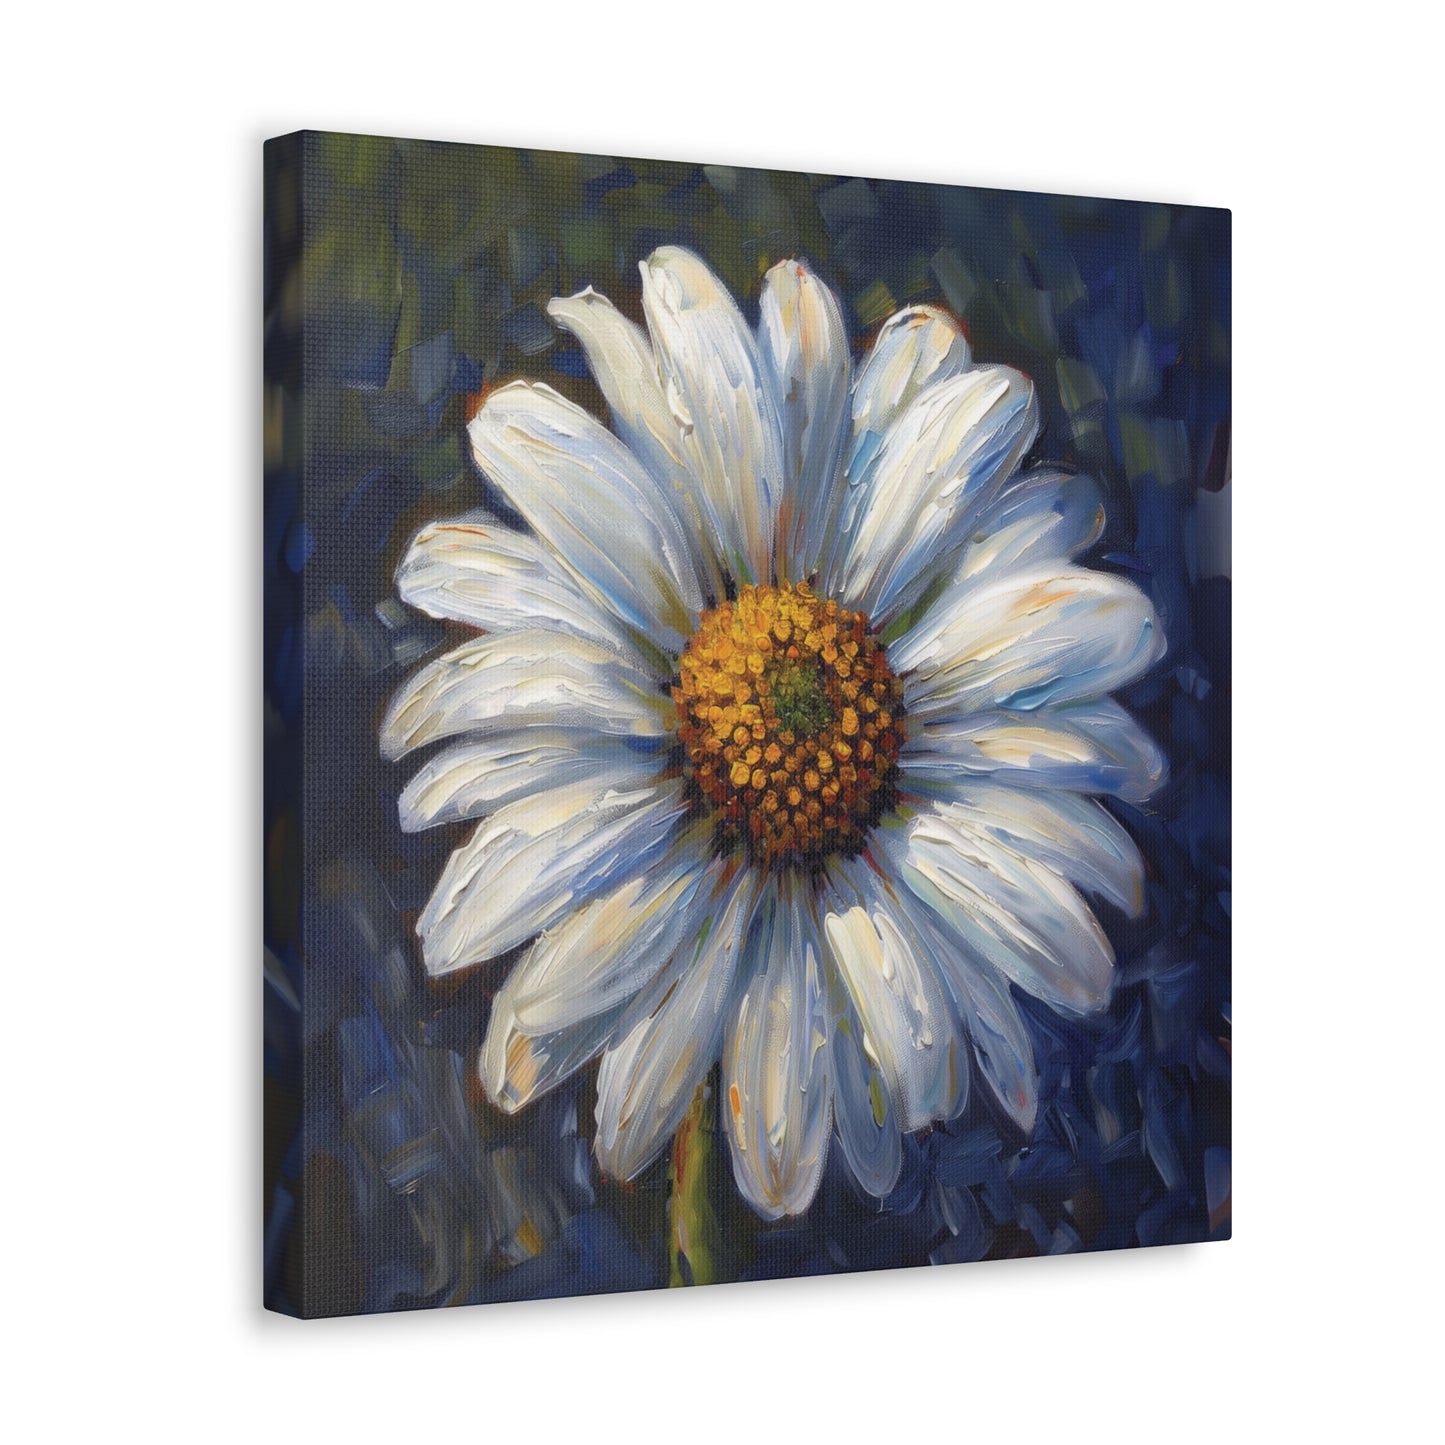 White Daisy Blue and Green Background Oil Heavy Brush Stroke Print on Canvas Gallery - 5 Sizes